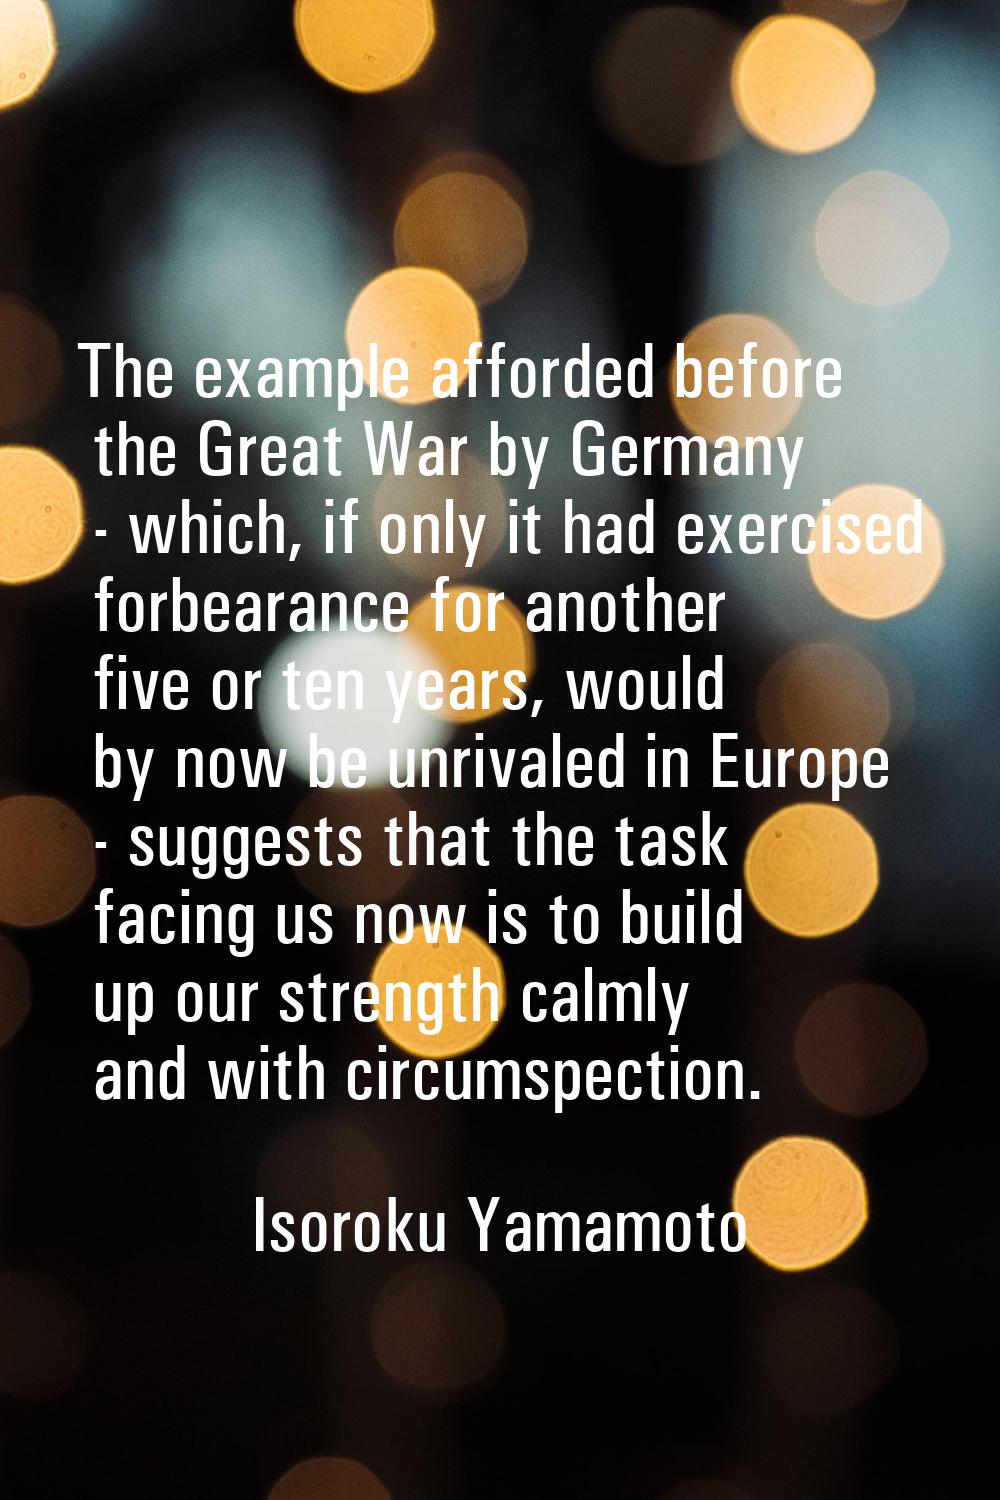 The example afforded before the Great War by Germany - which, if only it had exercised forbearance 